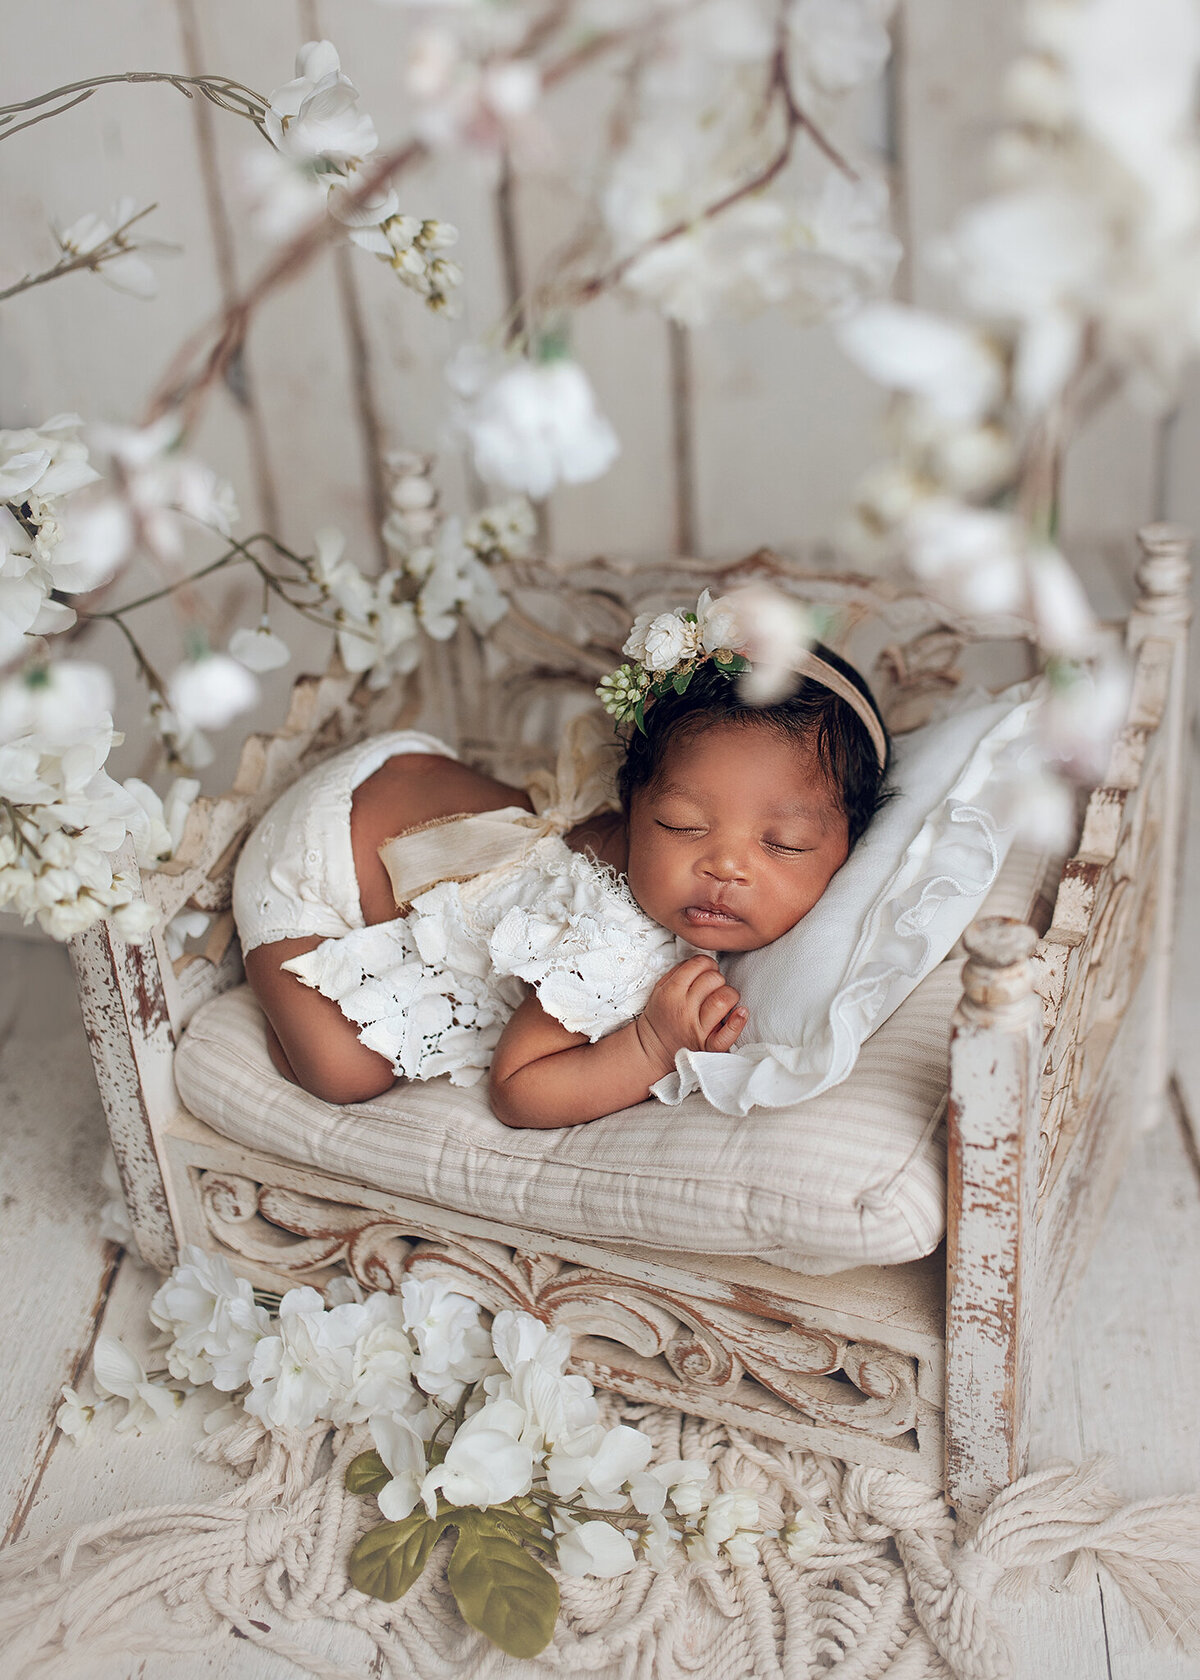 sweet newborn baby dressed in a white outfit laying on little scroll wood bed under blooming branches with white flowers